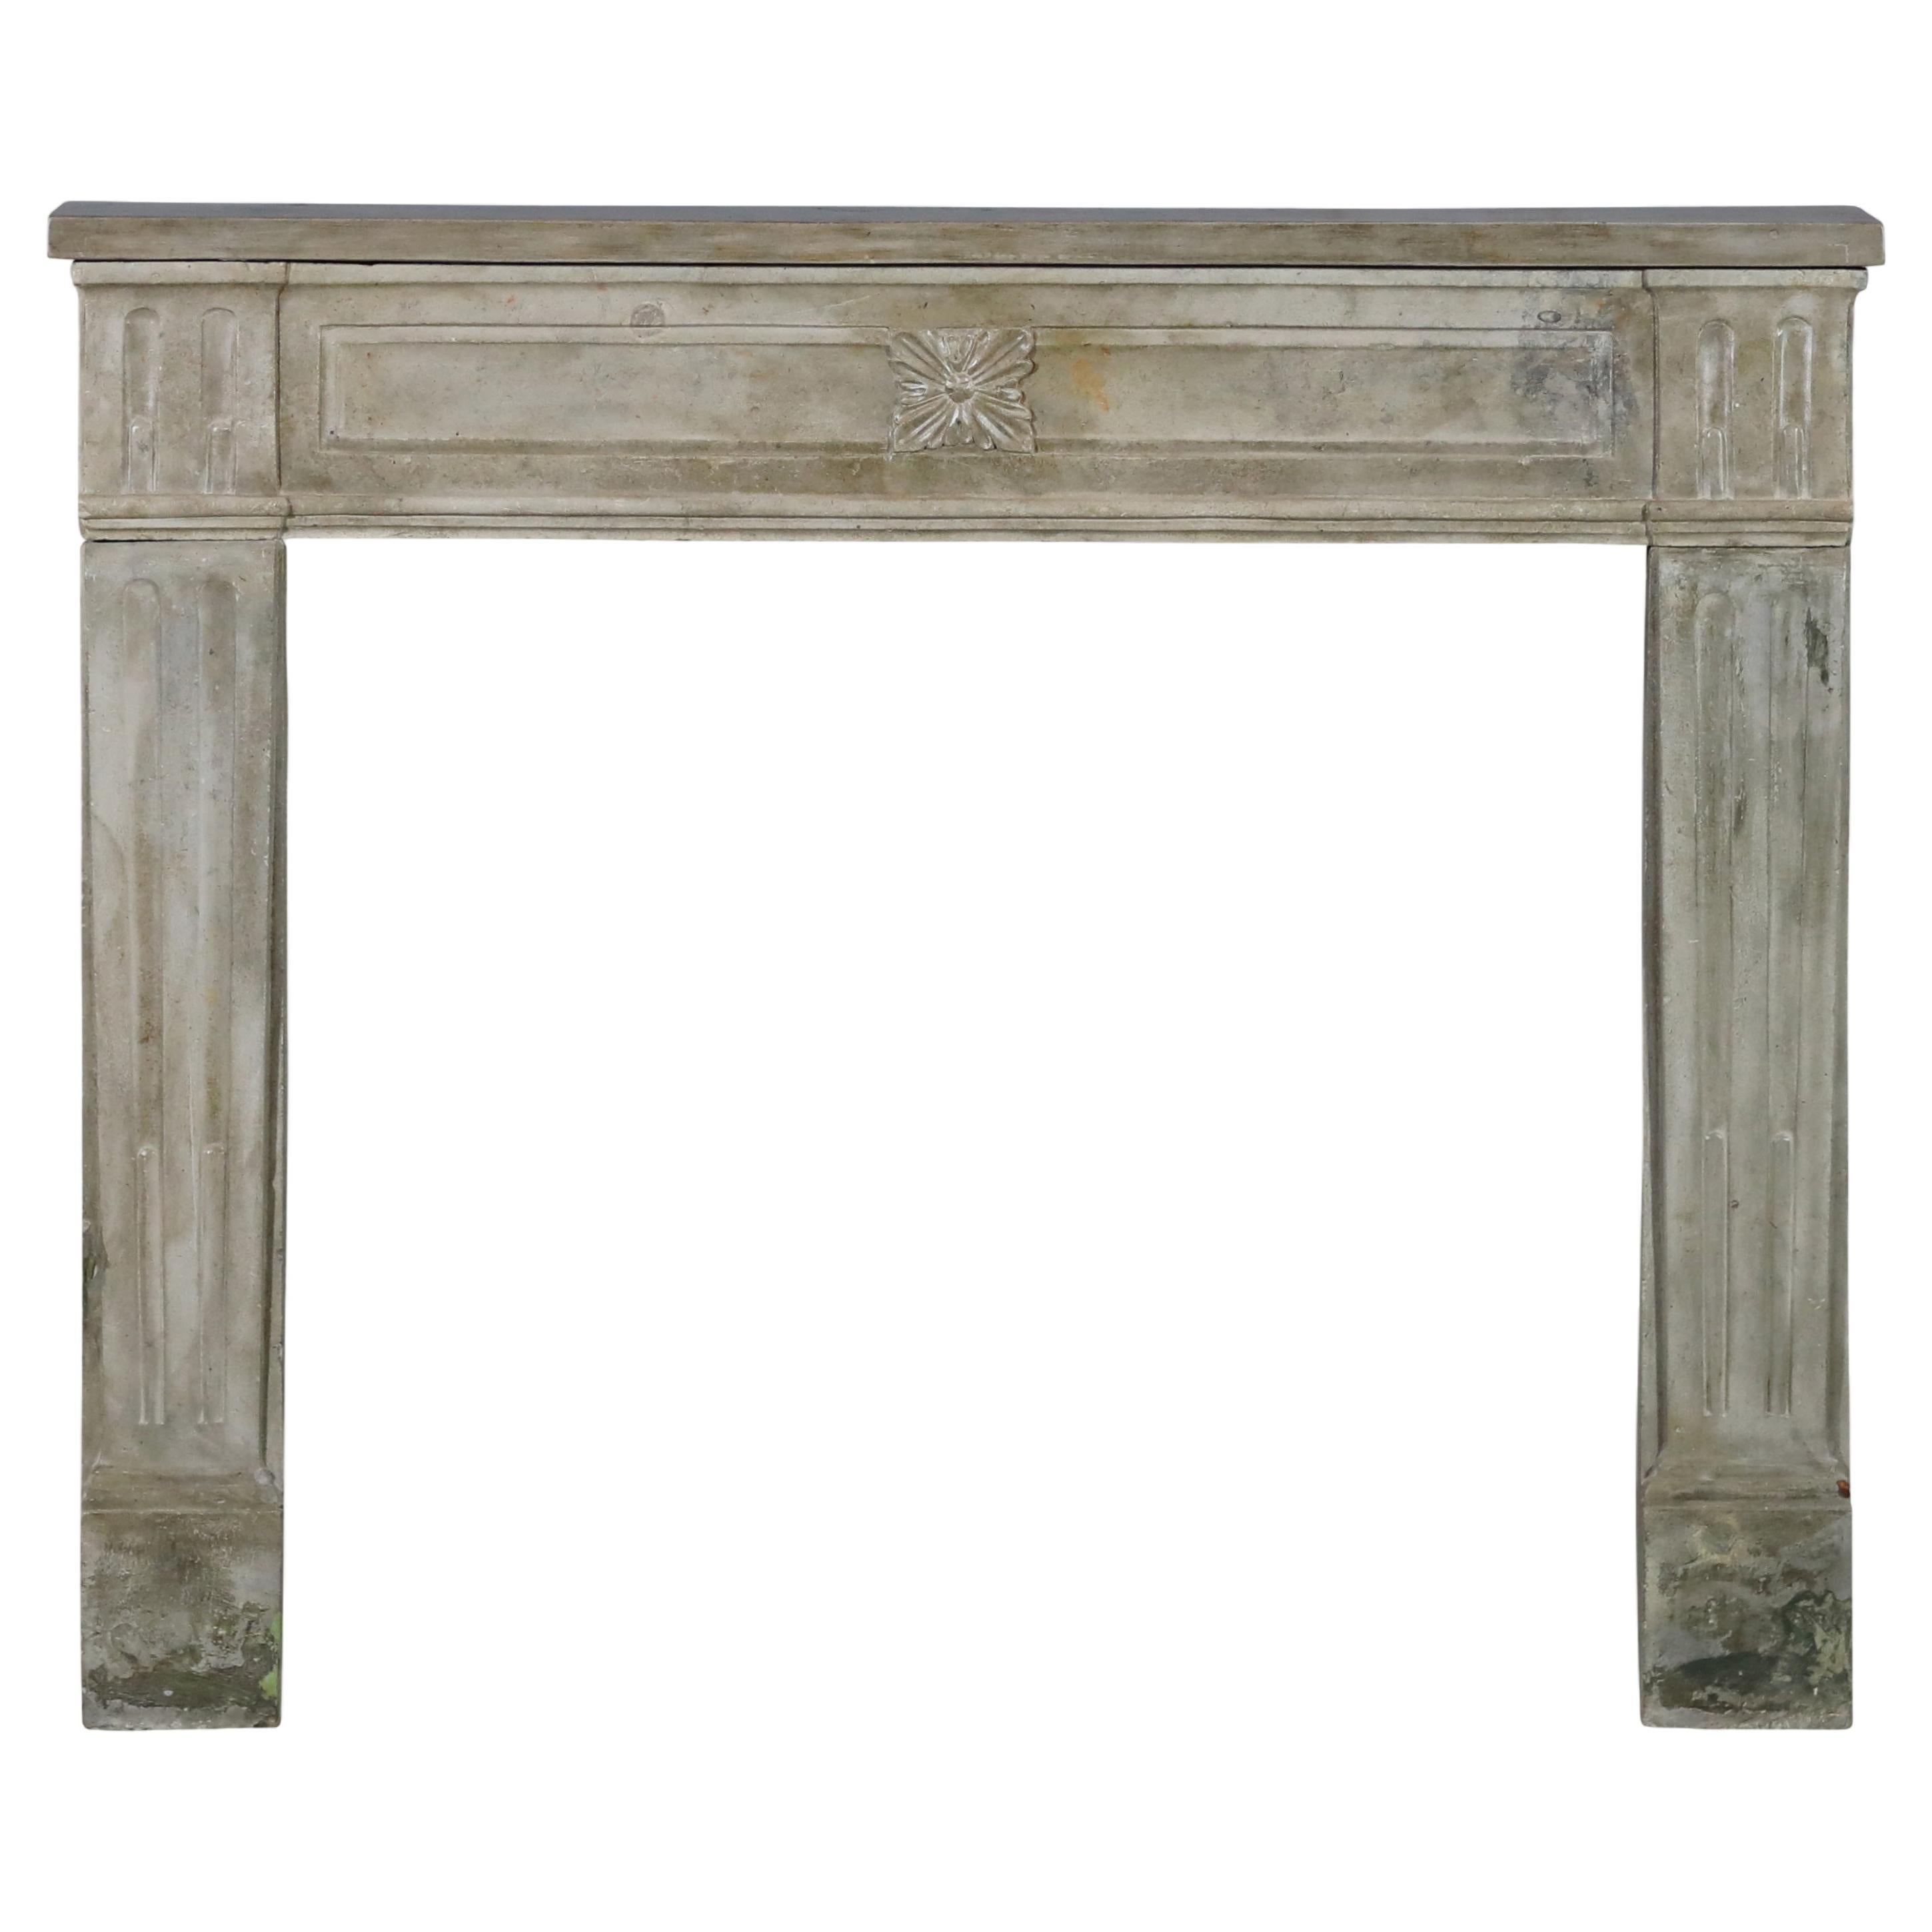 18th Century French Louis XVI Statement Fireplace From Paris